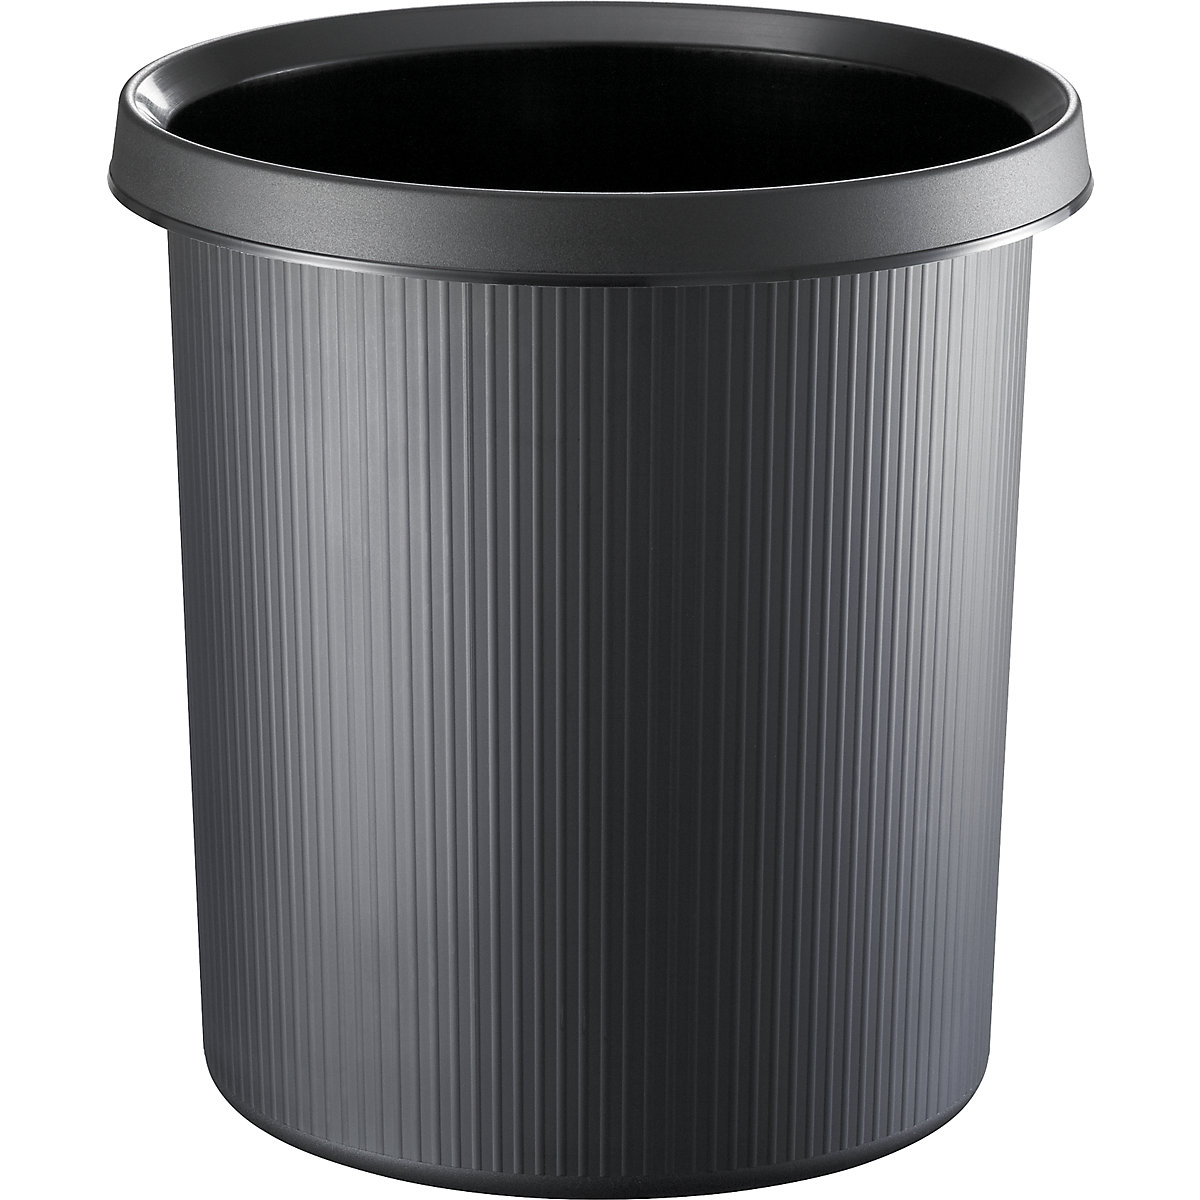 Plastic waste paper bin with stripes – helit, capacity 18 l, pack of 5, black-3